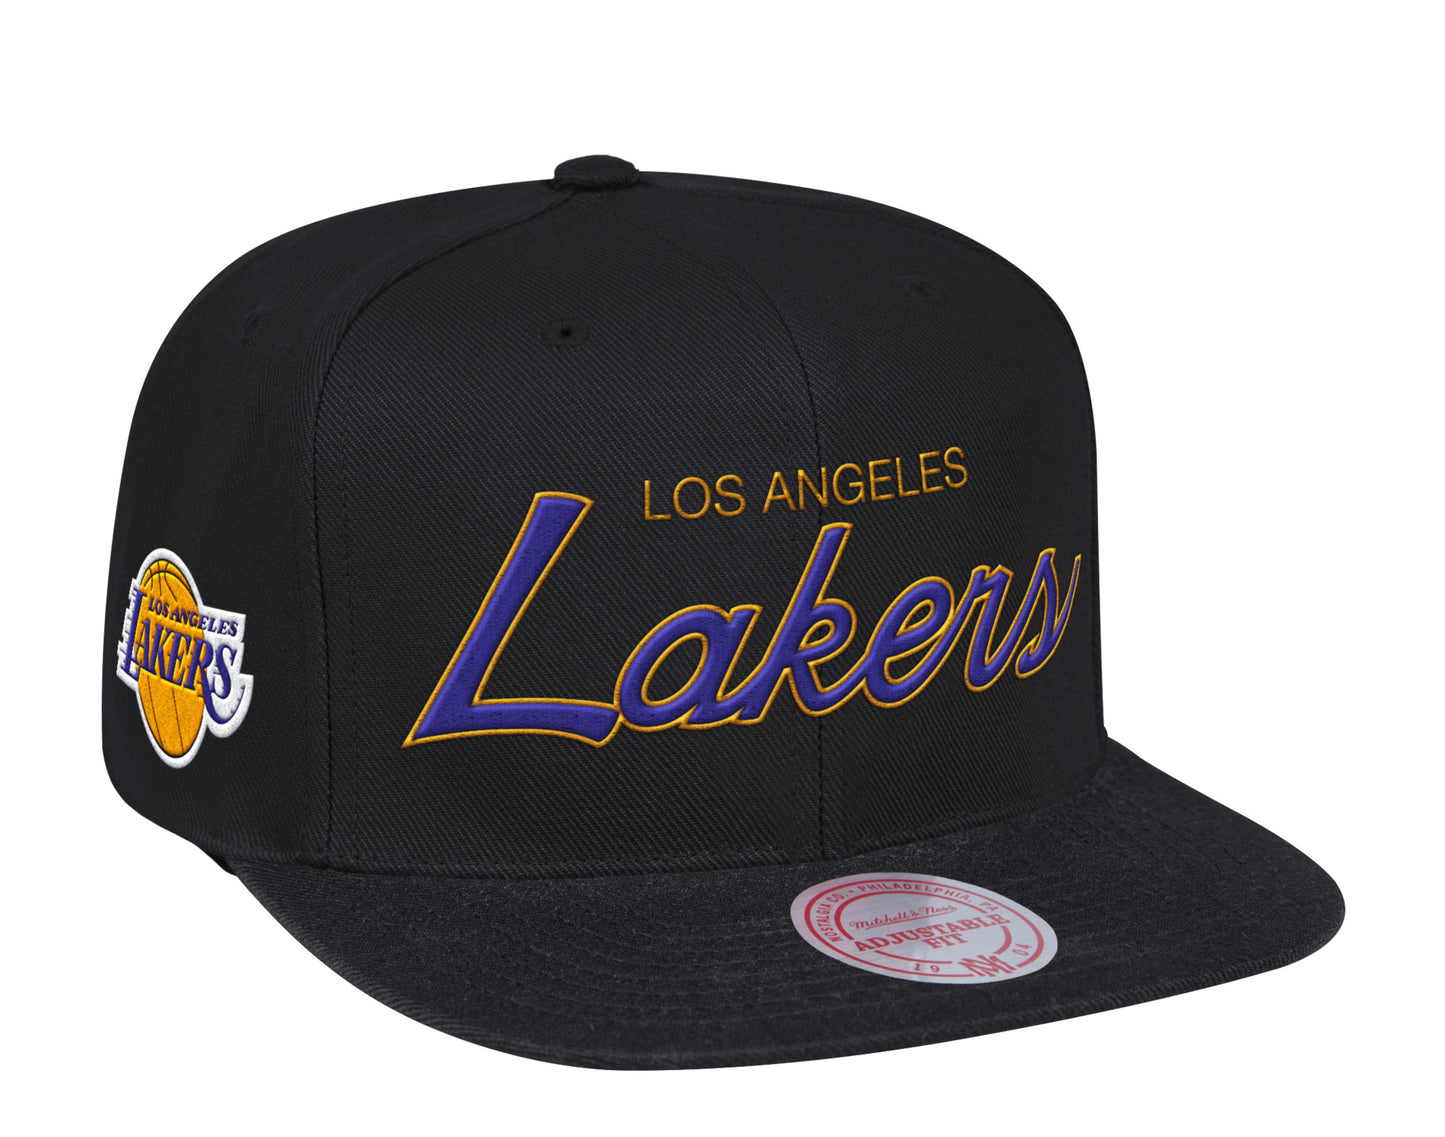 Mitchell & Ness Sports Specialty Los Angeles Lakers Snapback Hat